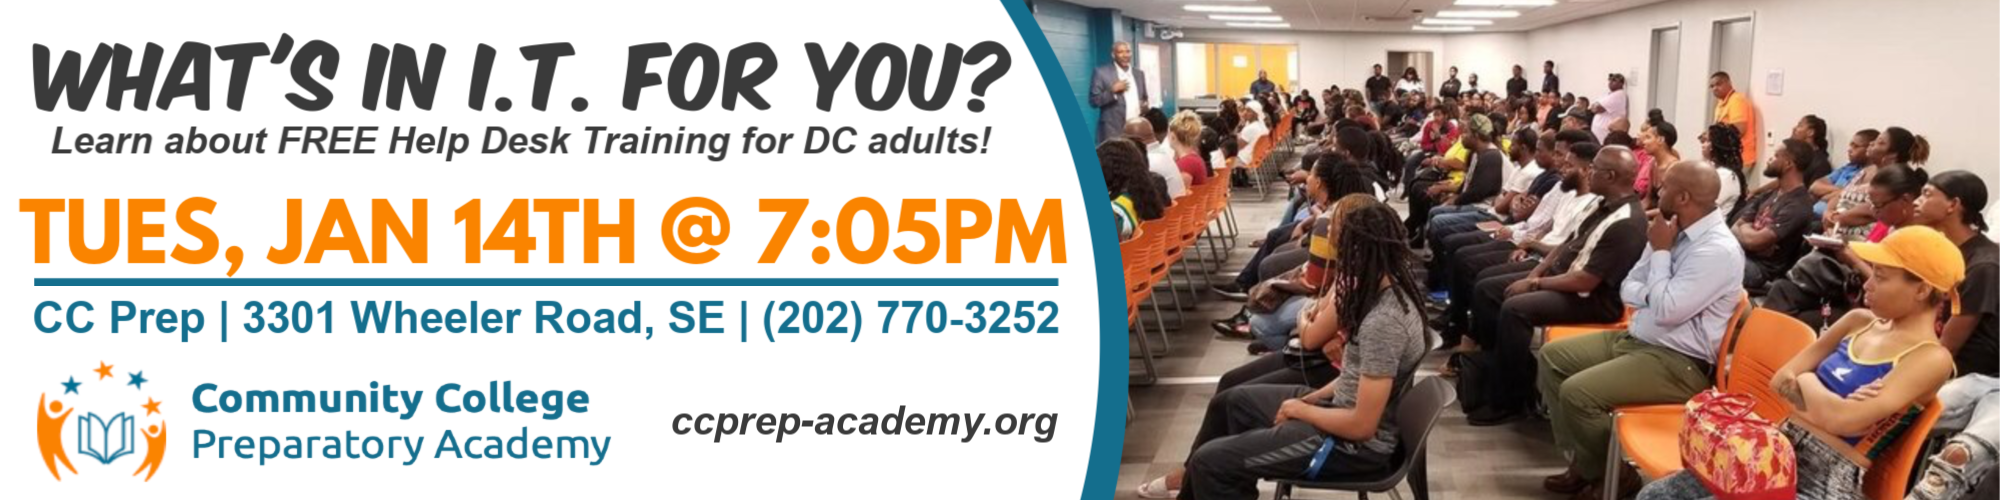 Jan 14 Info Session For Free I T Classes For Dc Adults At Cc